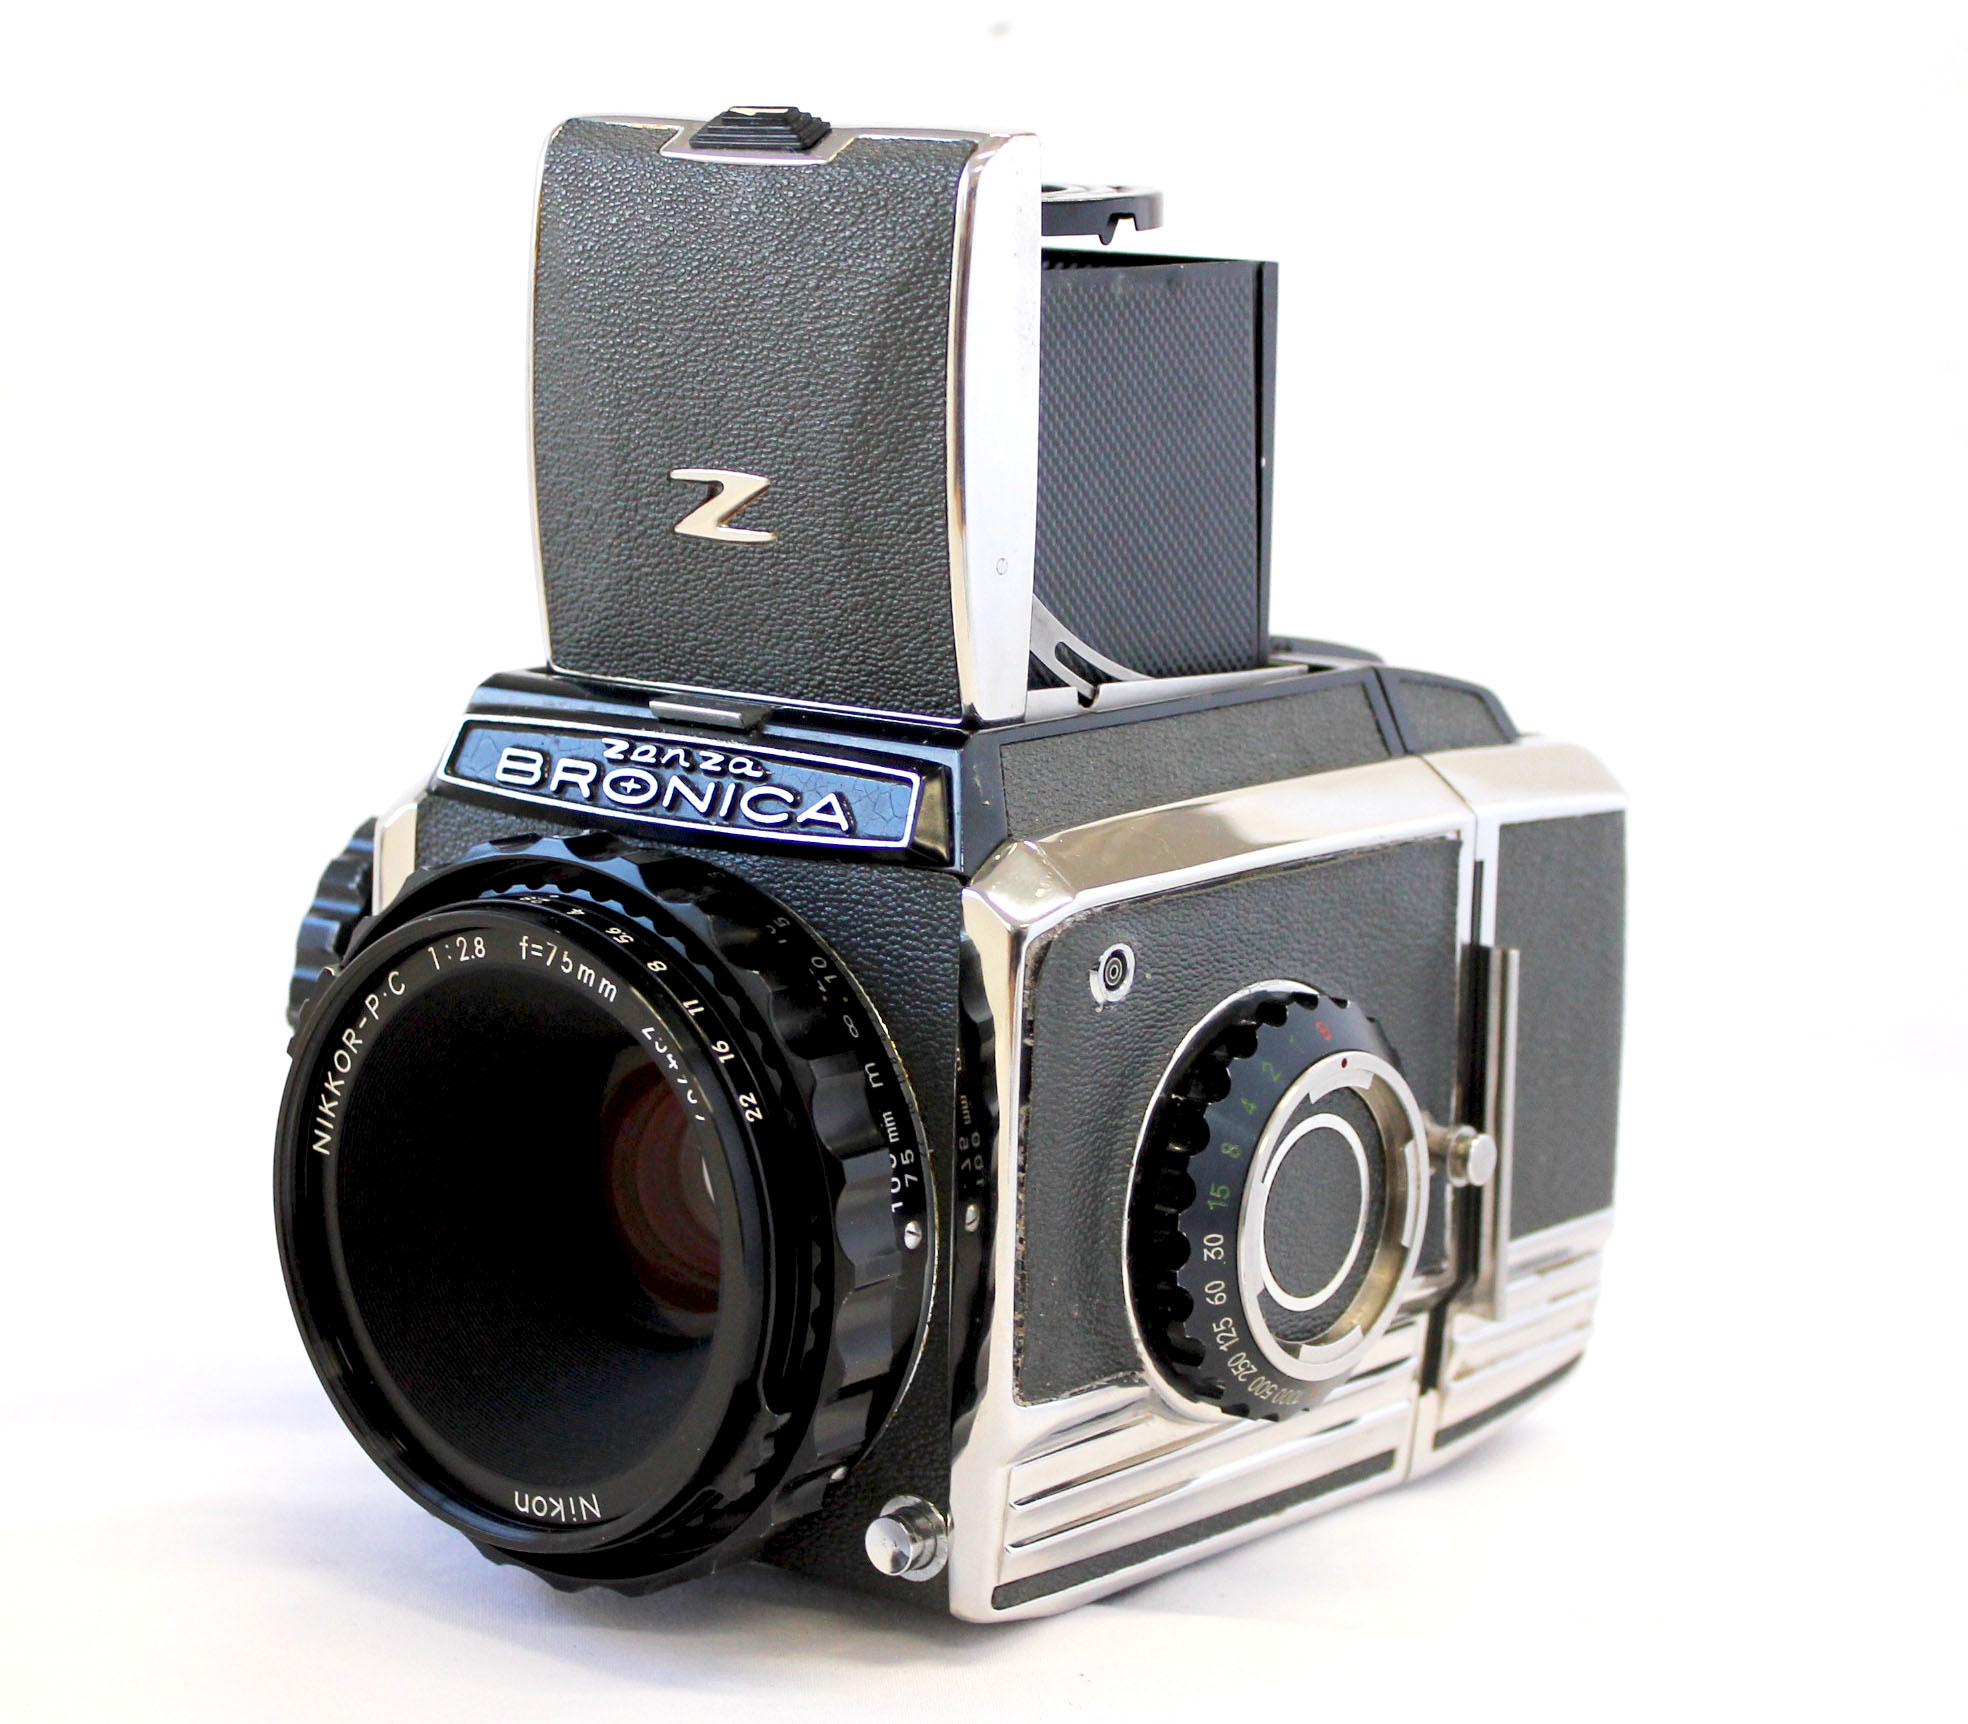 Zenza Bronica S2A Final Model (S/N CB161*) w/ Nikkor-P.C 75mm F/2.8 and 6x6 Film Back from Japan